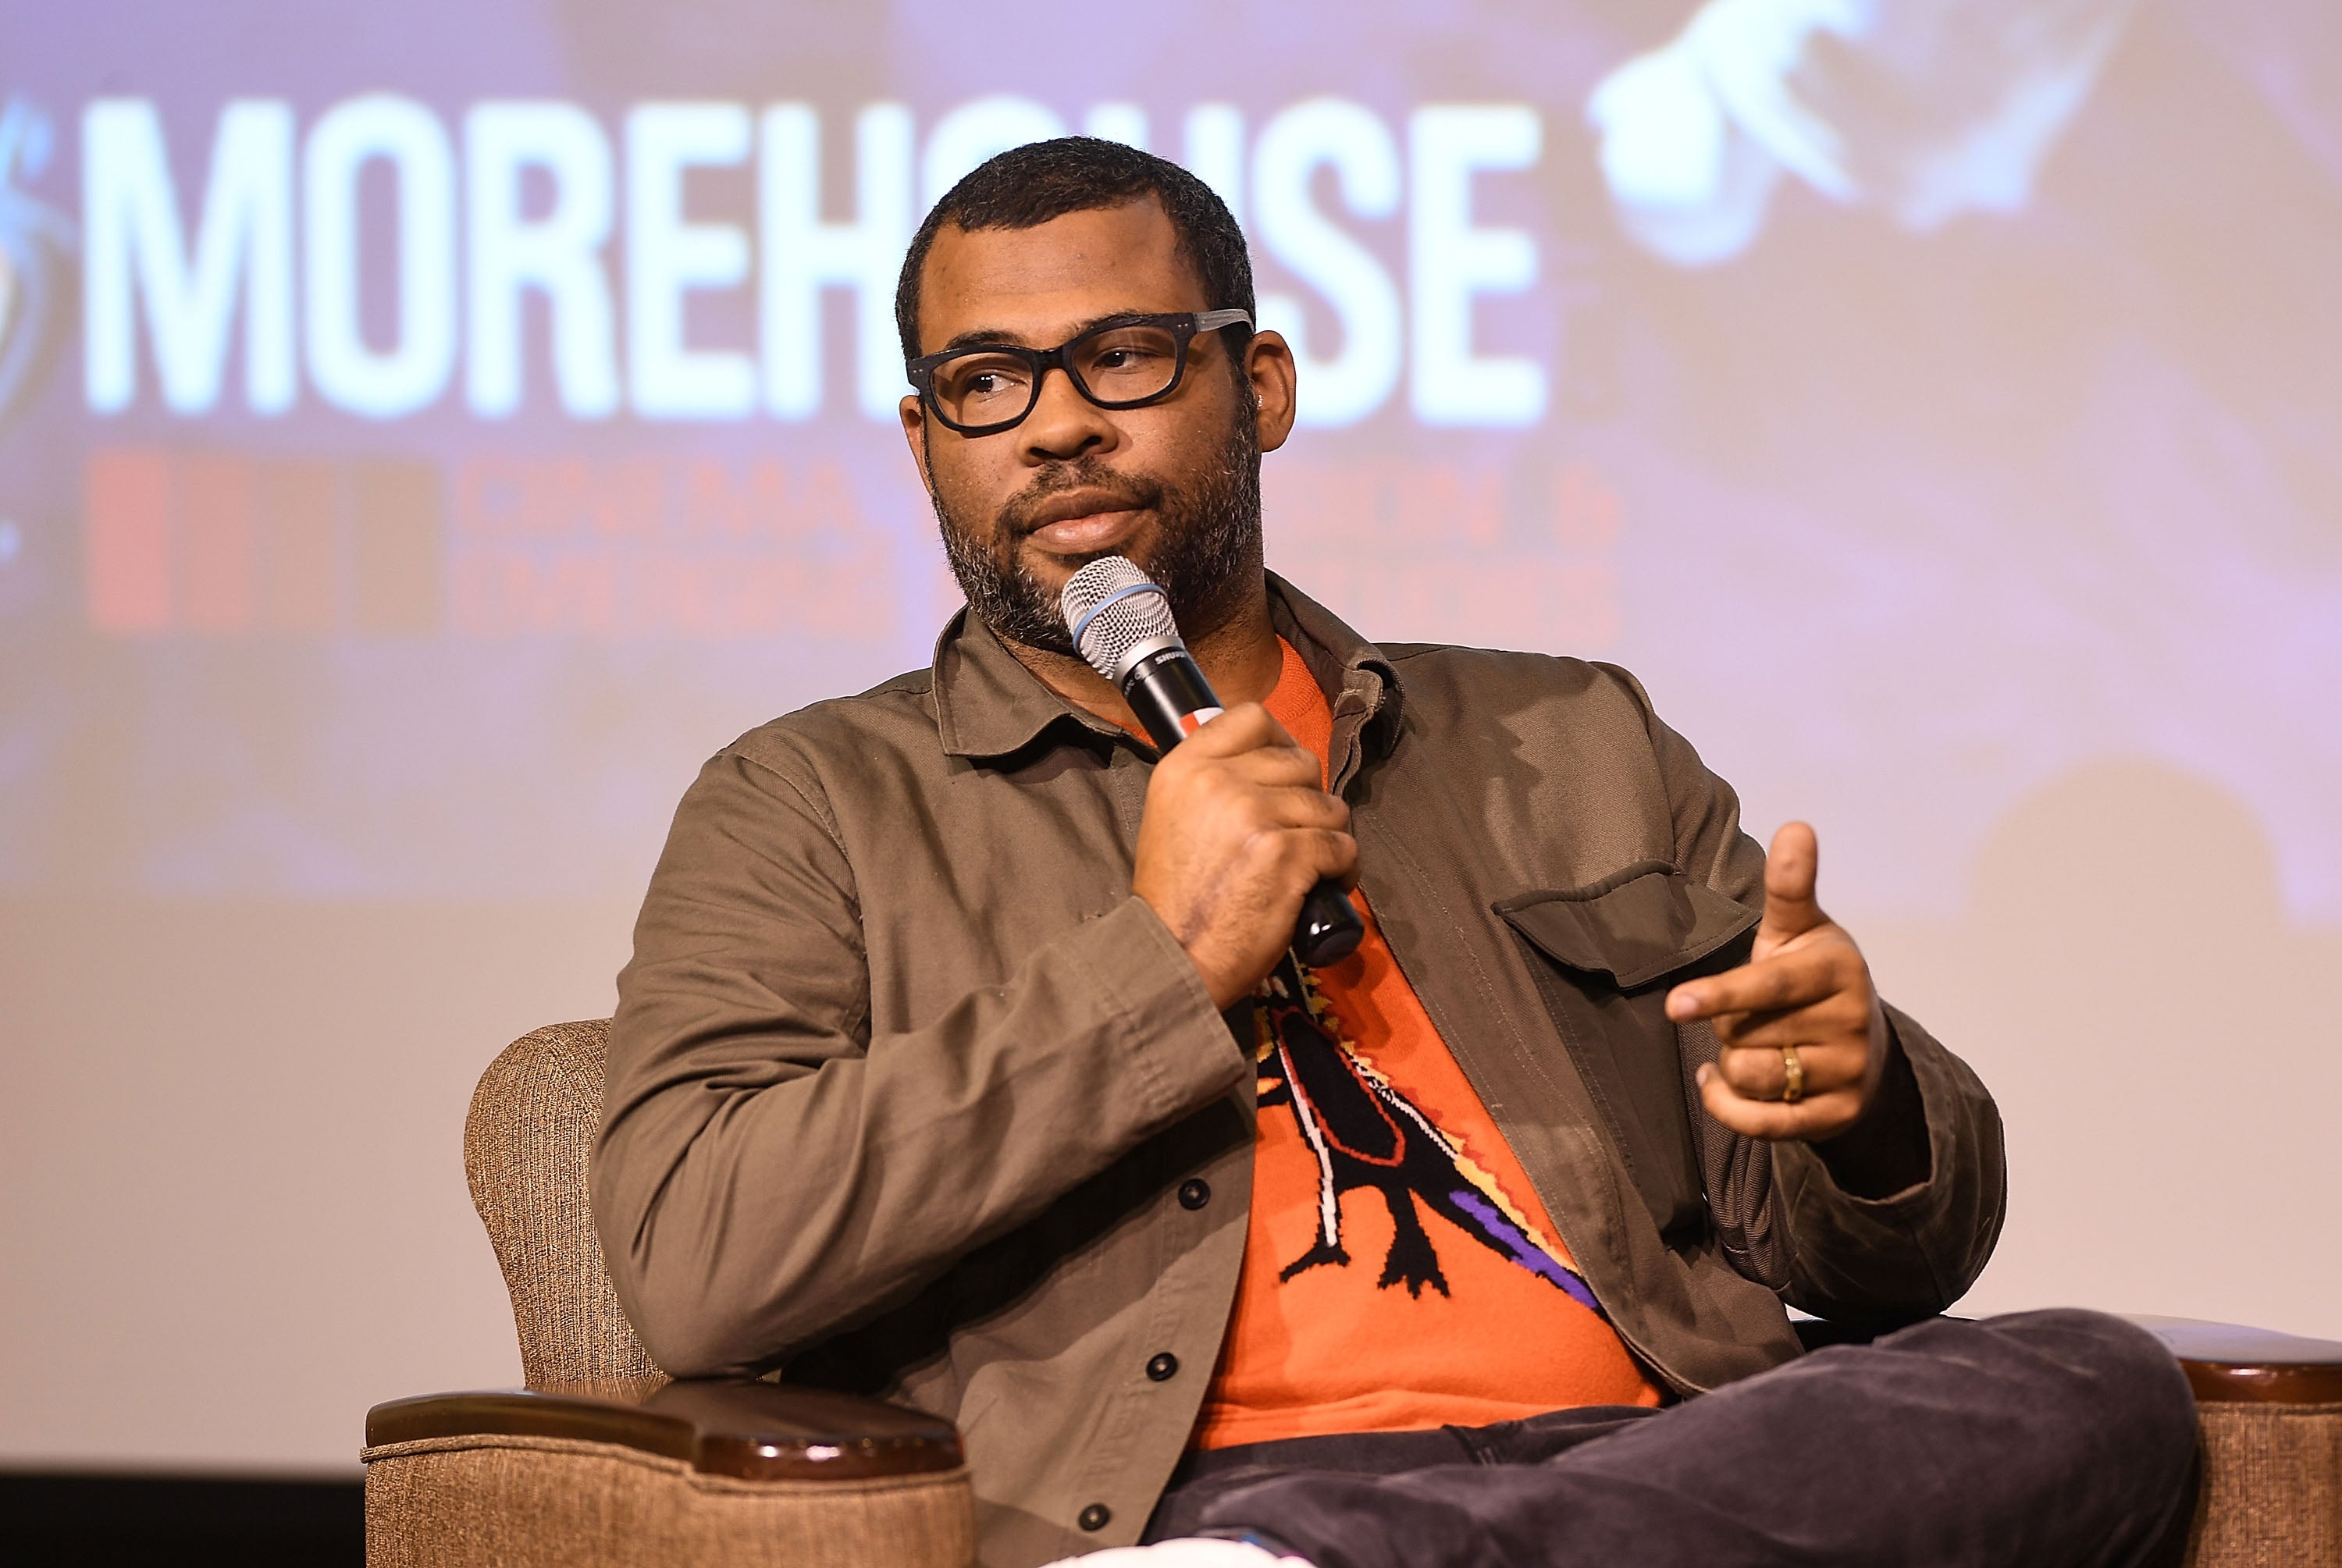 'Get Out’s' Jordan Peele And 'Underground’s' Misha Green Team Up For New Series
